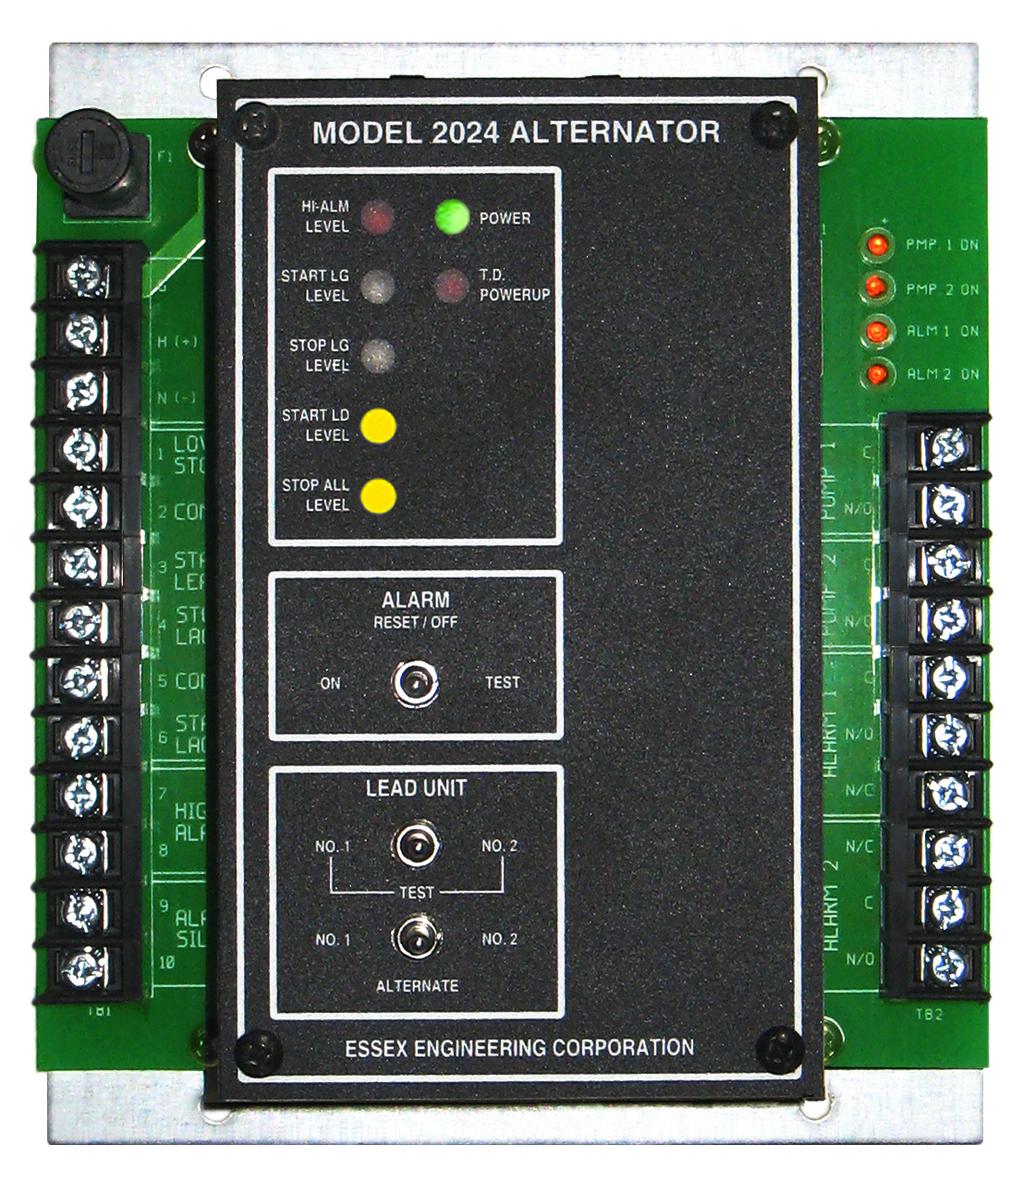 MODEL 2024 ELECTRONIC ALTERNATOR.... Provides a reliable, flexible system of starting, stopping, sequencing of pumps, blowers, & other devices. FEATURES Modular Construction.